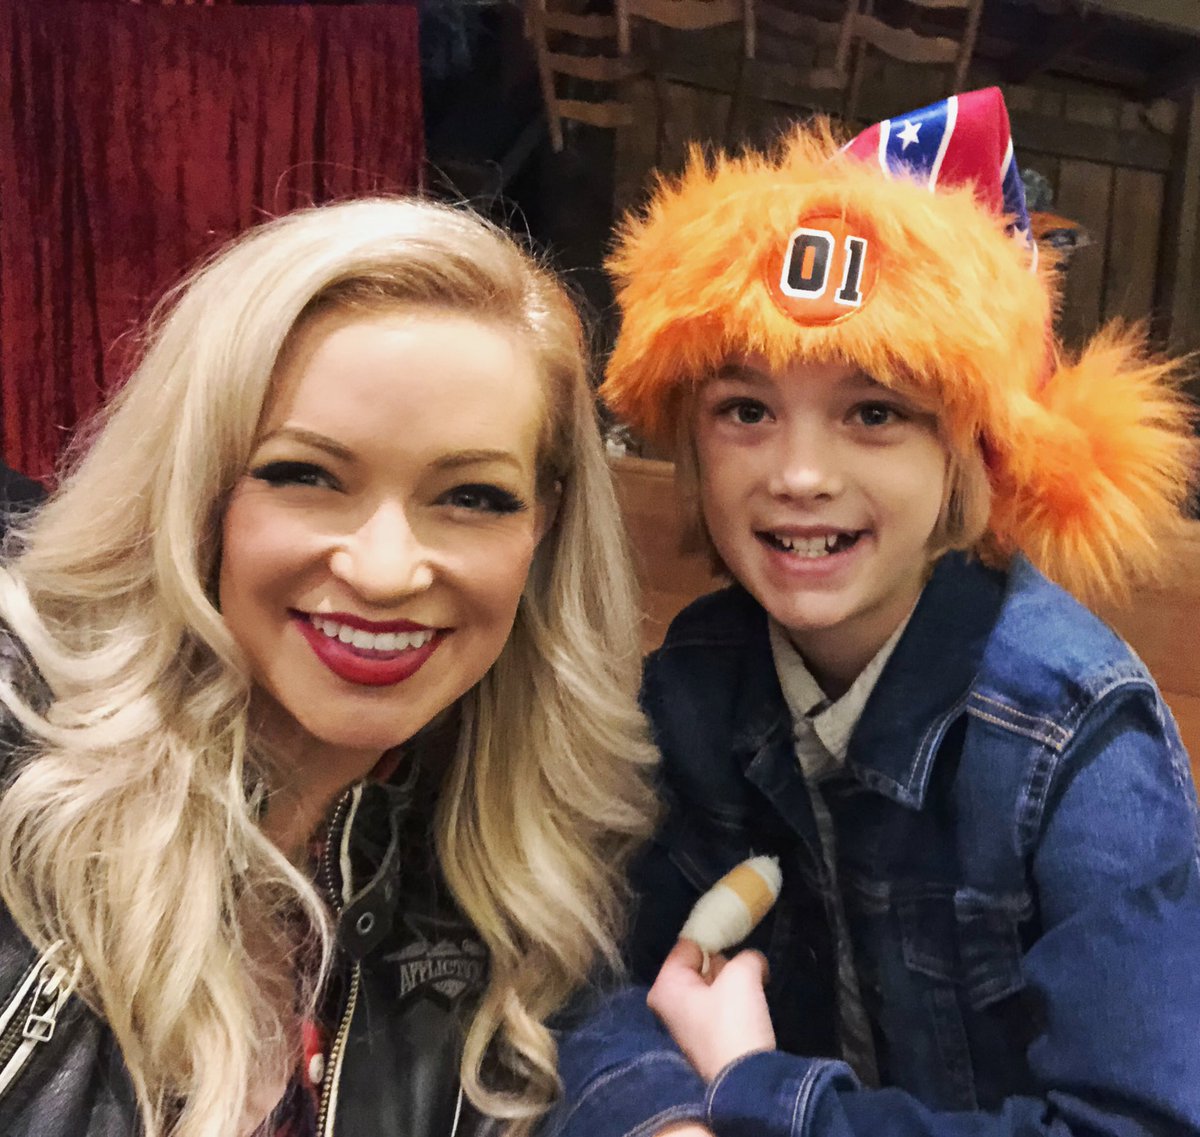 Mindy Robinson On Twitter My Favorite Little Man Right Here Check Out The New Family Friendly Movie We Re Both In That Just Came Out To Streaming Today John Schneider S Christmas Cars